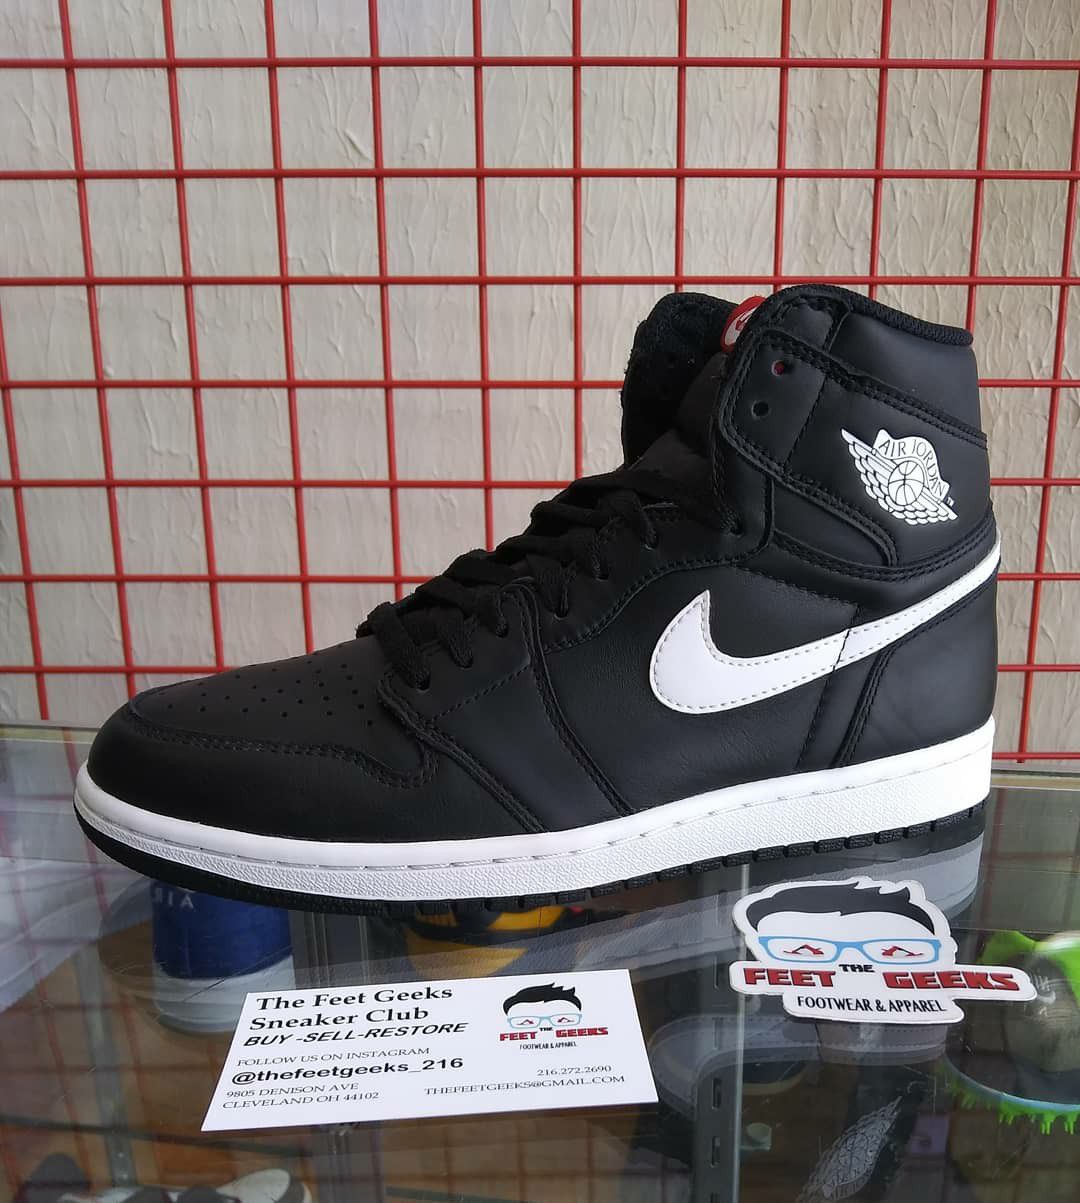 NIKE AIR JORDAN 1 RETRO YING YANG SIZE 8 US MEN SHOES EXCELLENT USED CONDITION $170